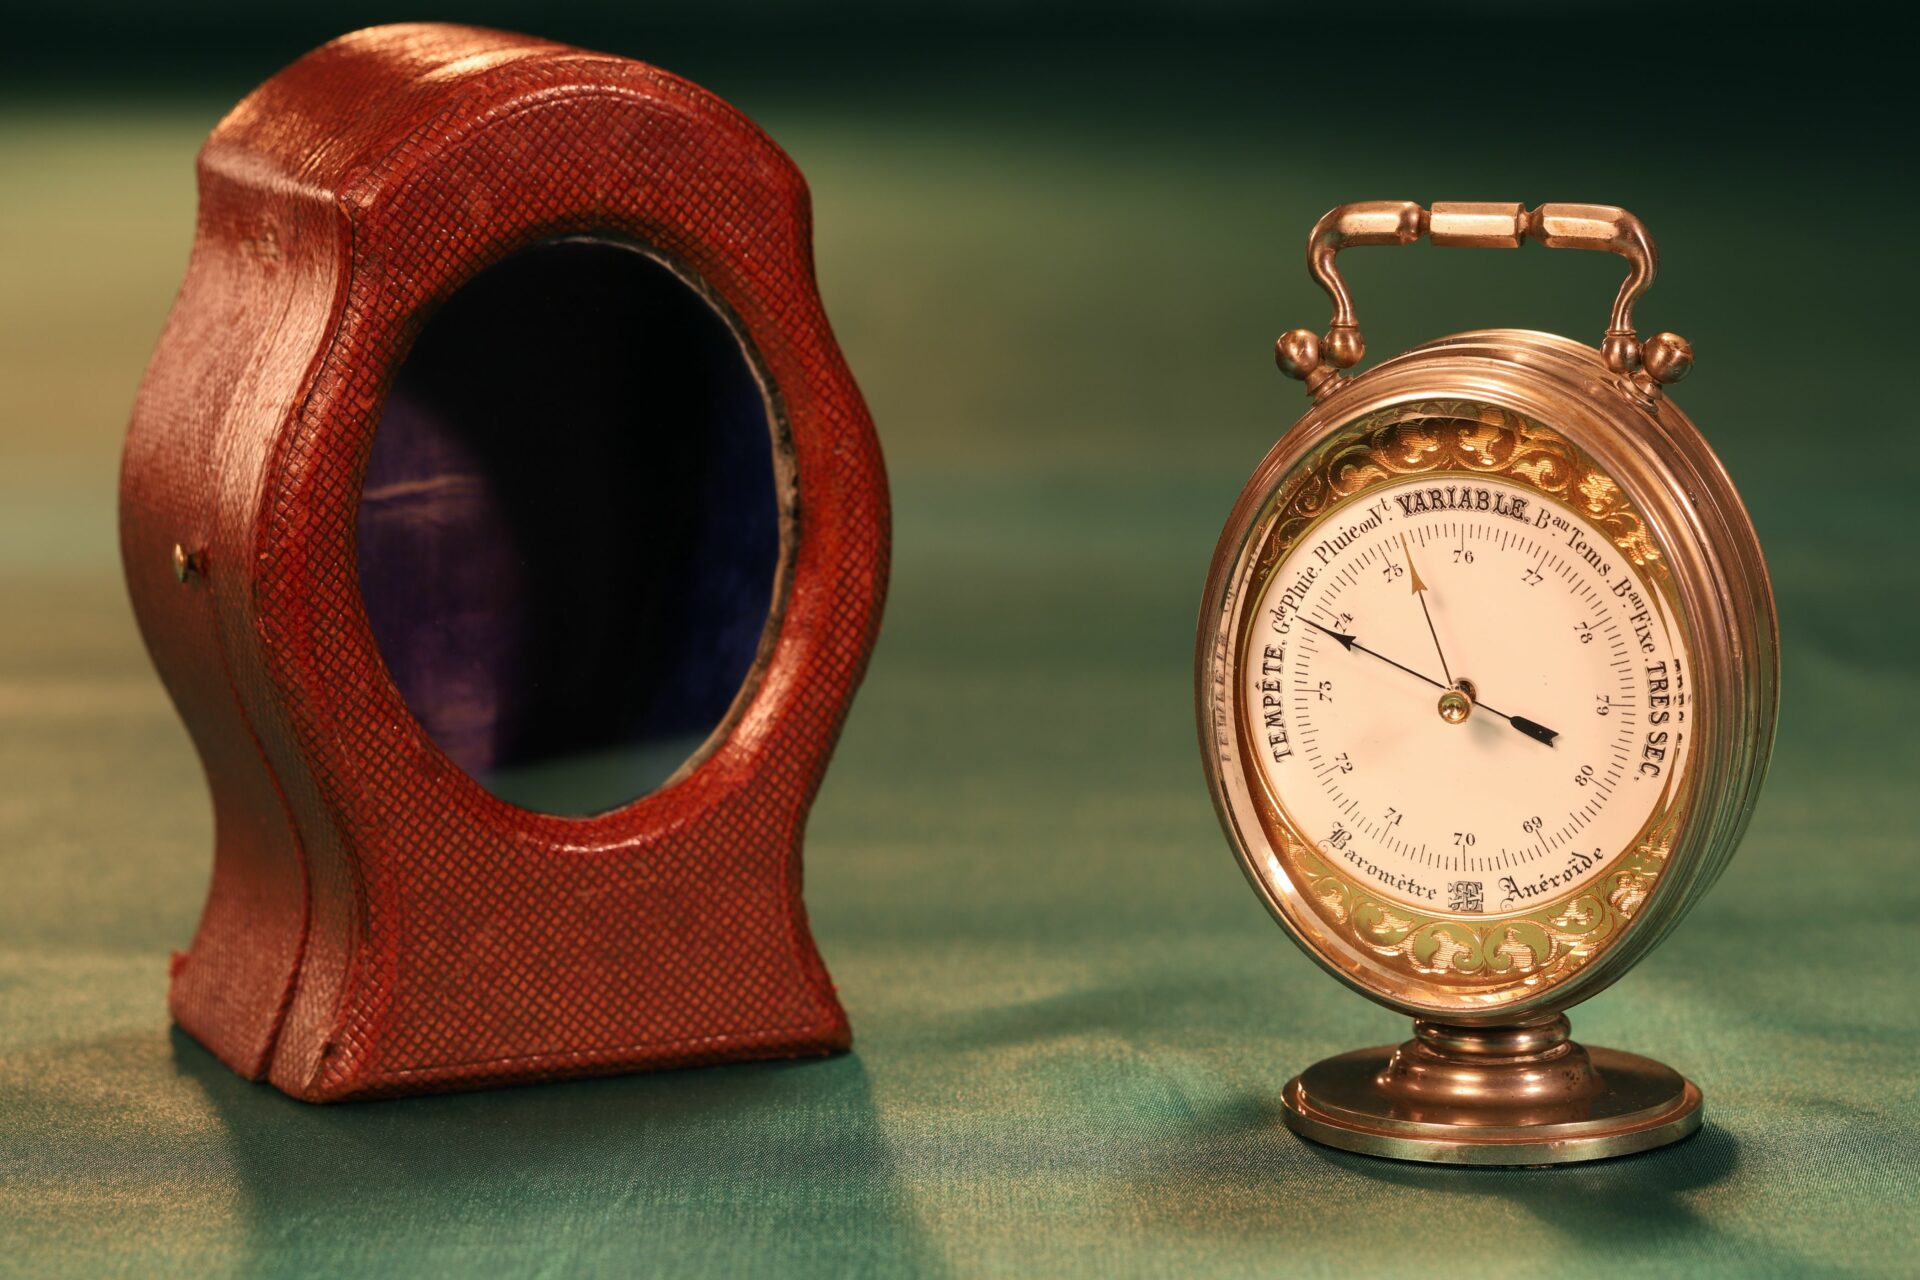 Image of Redier Travel Compendium showing the Barometer and the Original Travel Case c1880